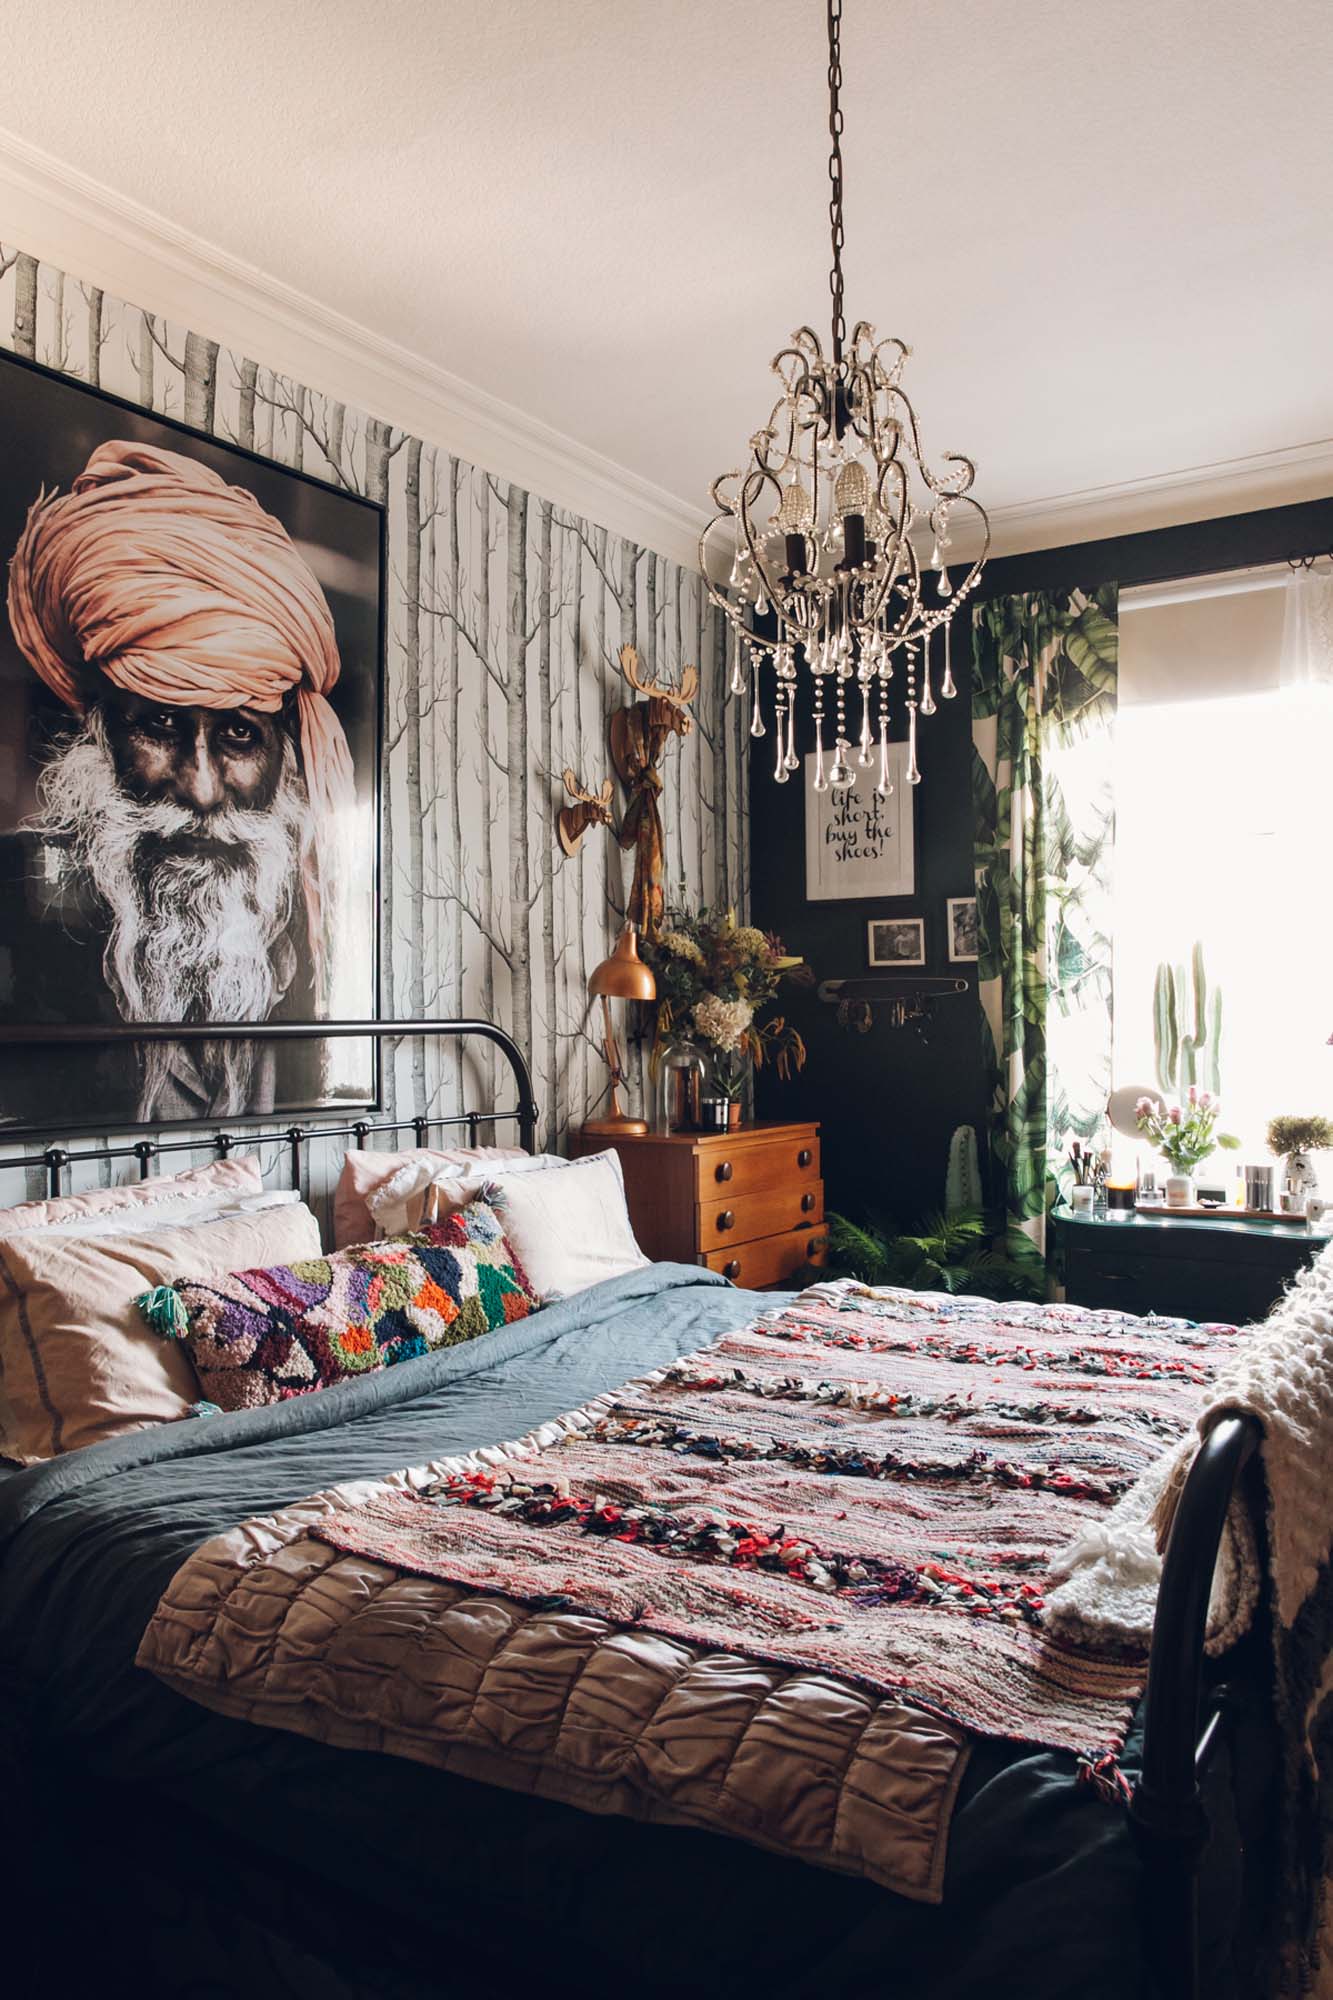 Nicola's bedroom rocks the eclectic boho look, no thanks to the hubby